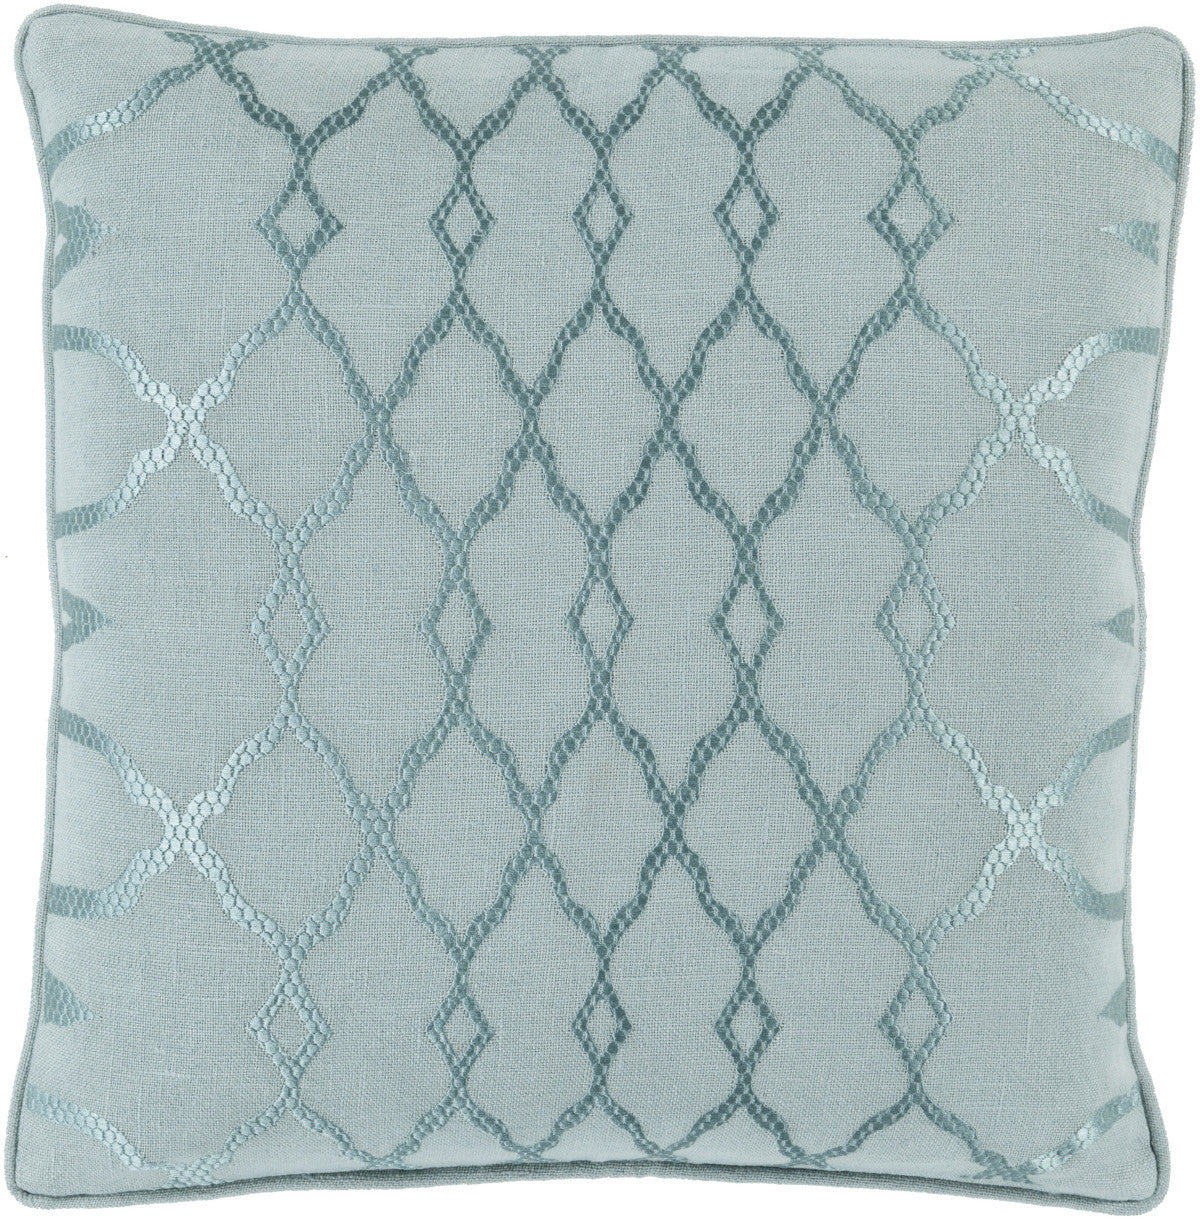 Surya Lydia Luxury in Linen LY-002 Pillow